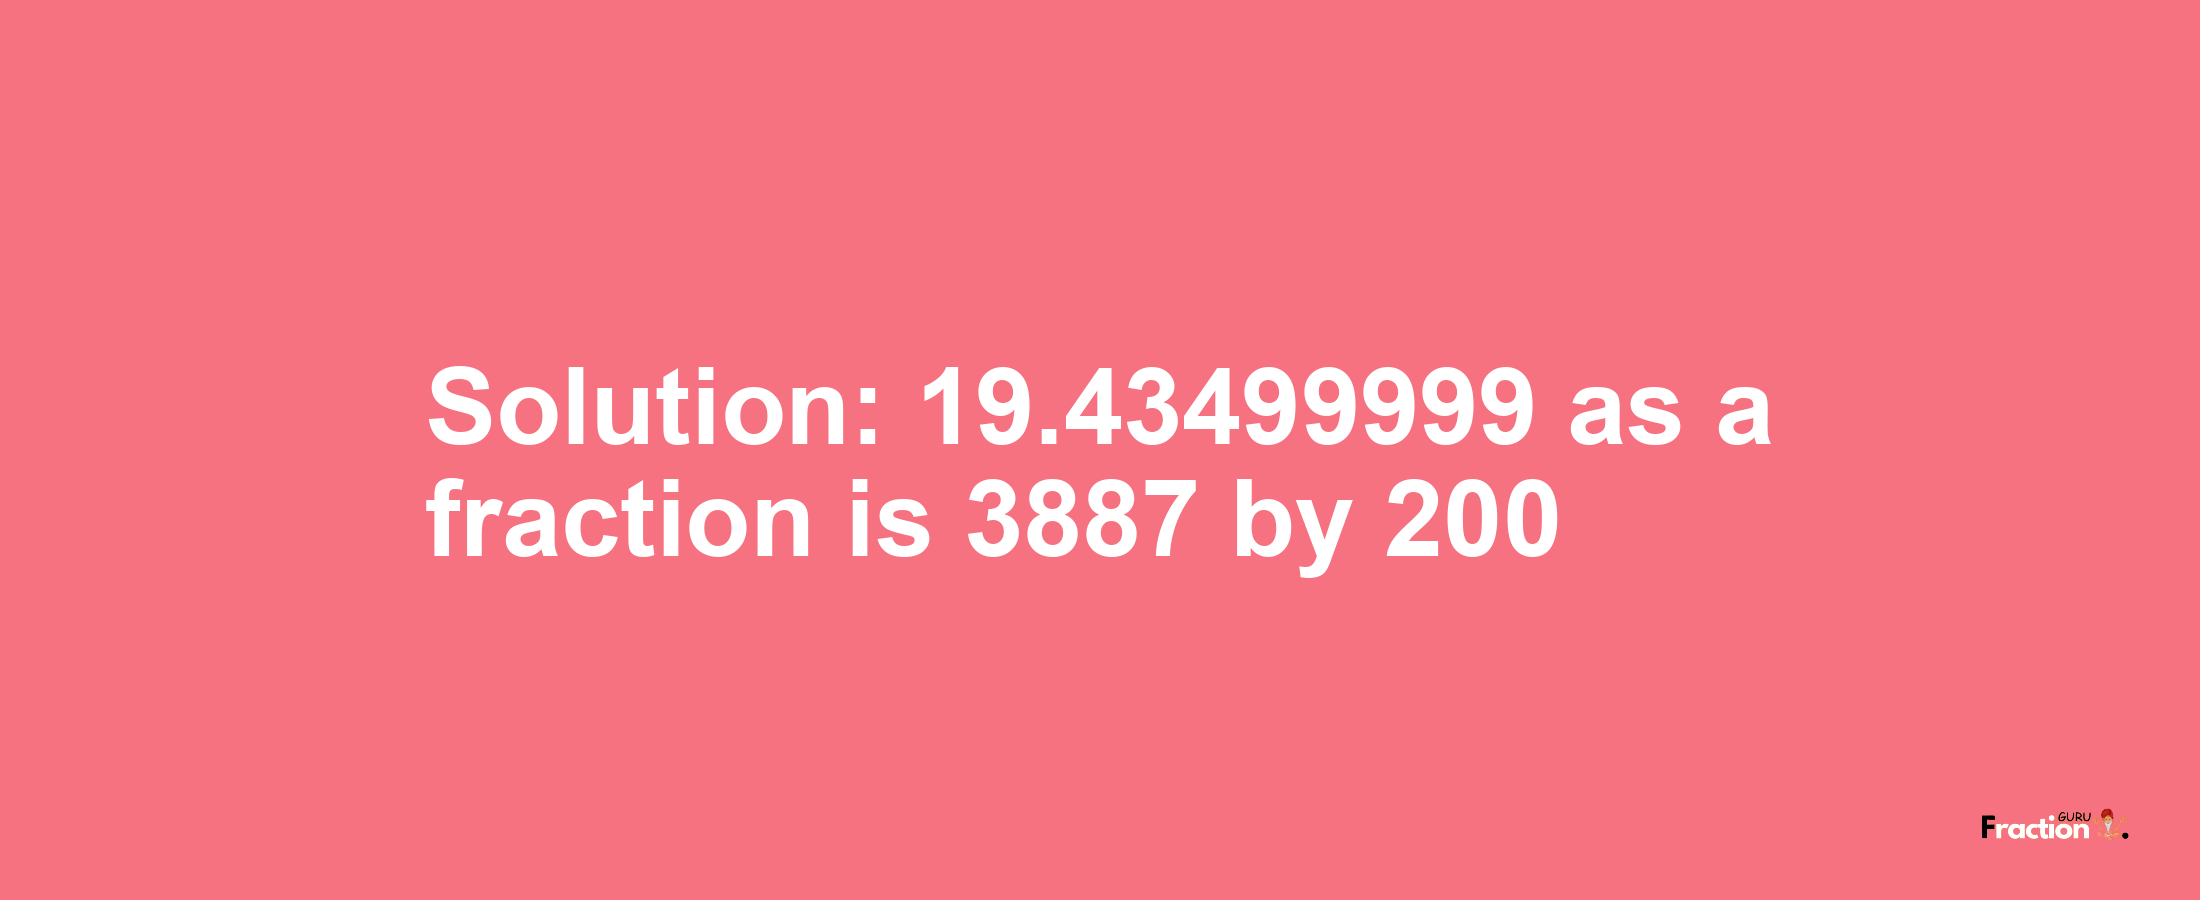 Solution:19.43499999 as a fraction is 3887/200